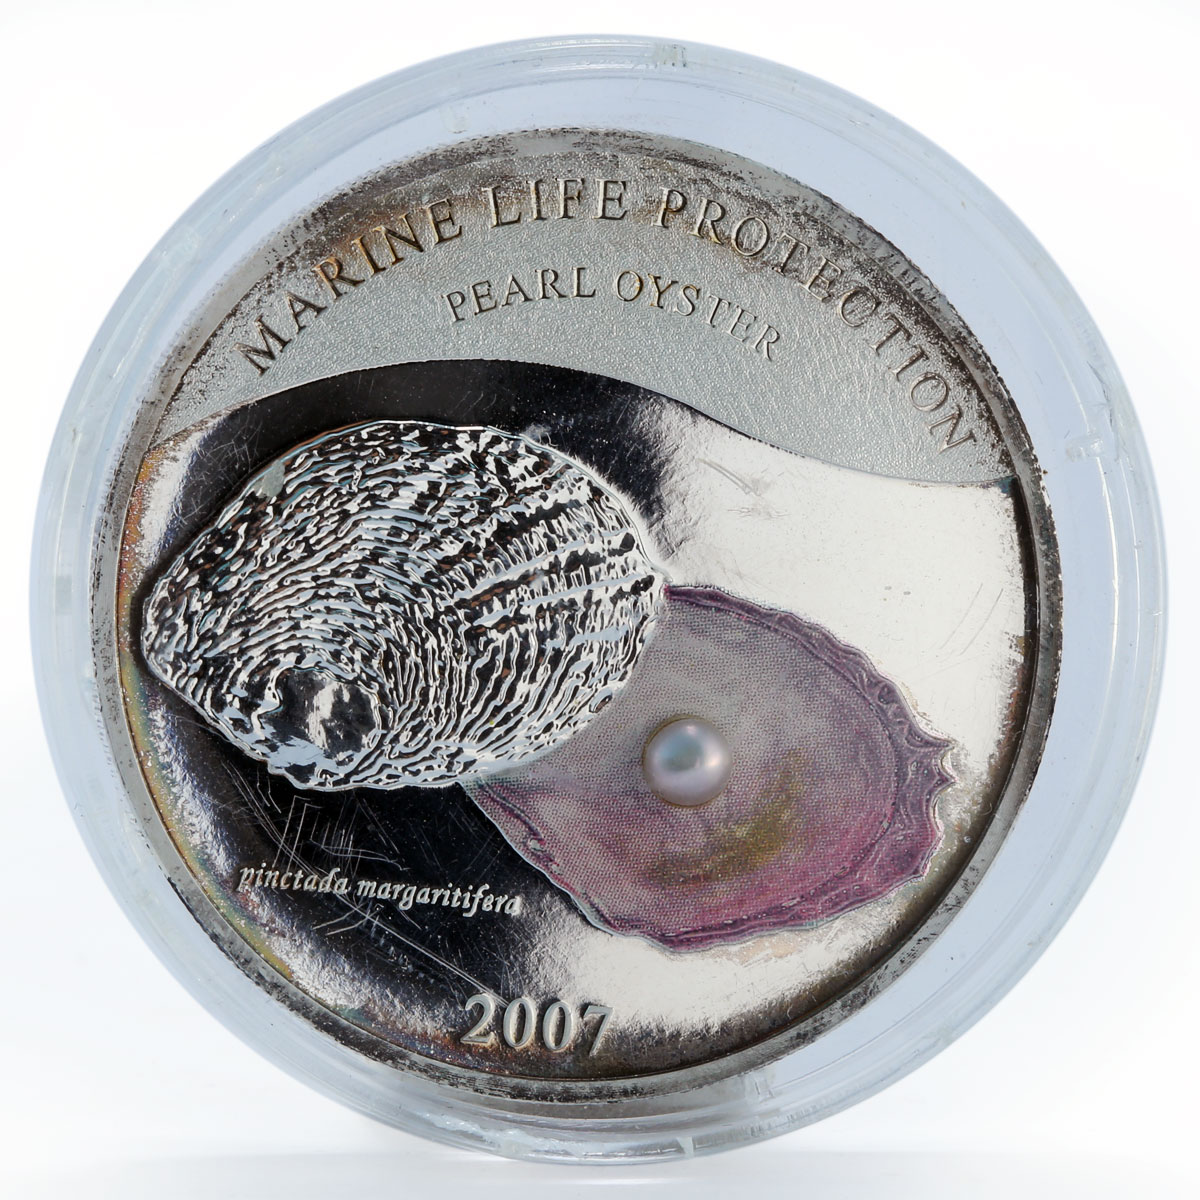 Details about   Palau 2014 Berlin Wall 5 Dollars Colour Silver Coin,Proof